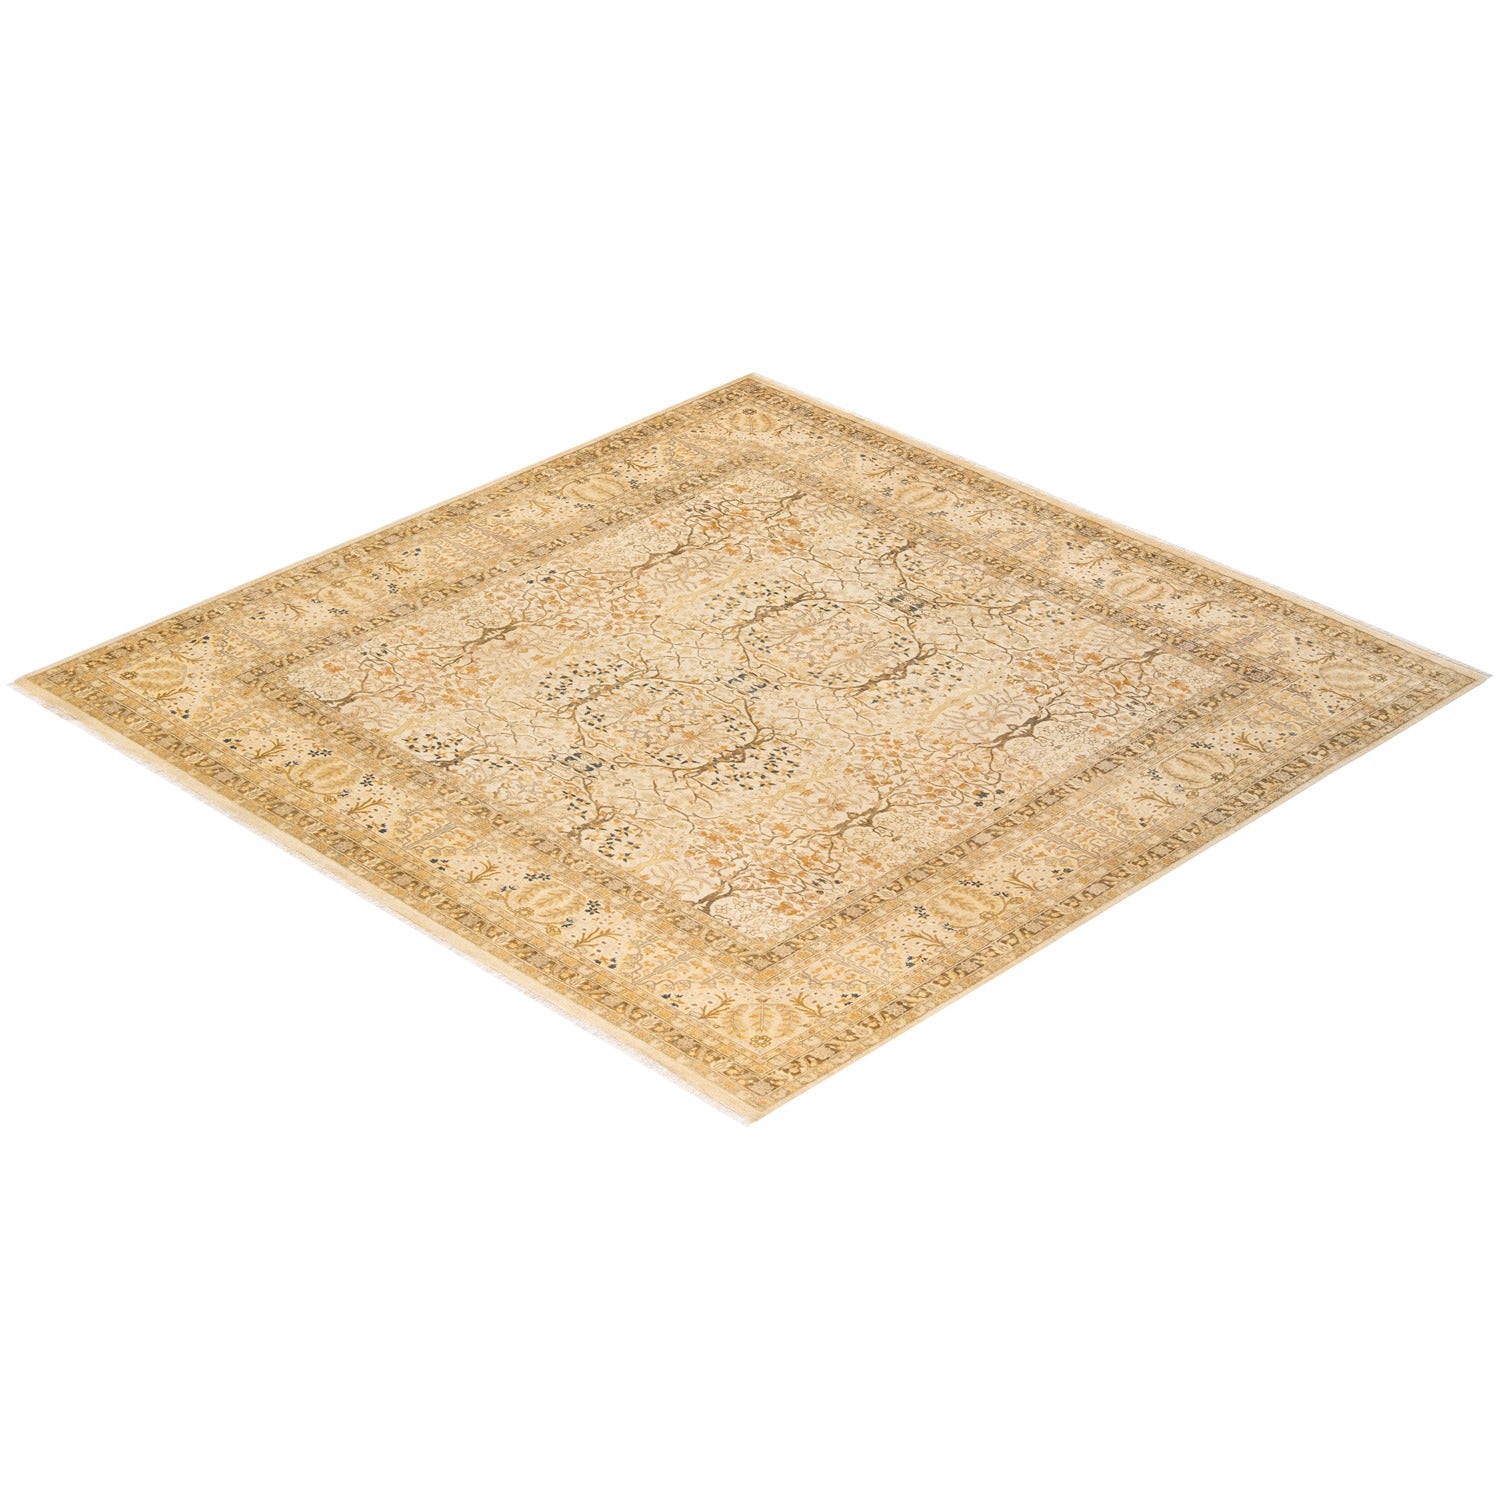 An ornate diamond-shaped rug with intricate beige and brown patterns.